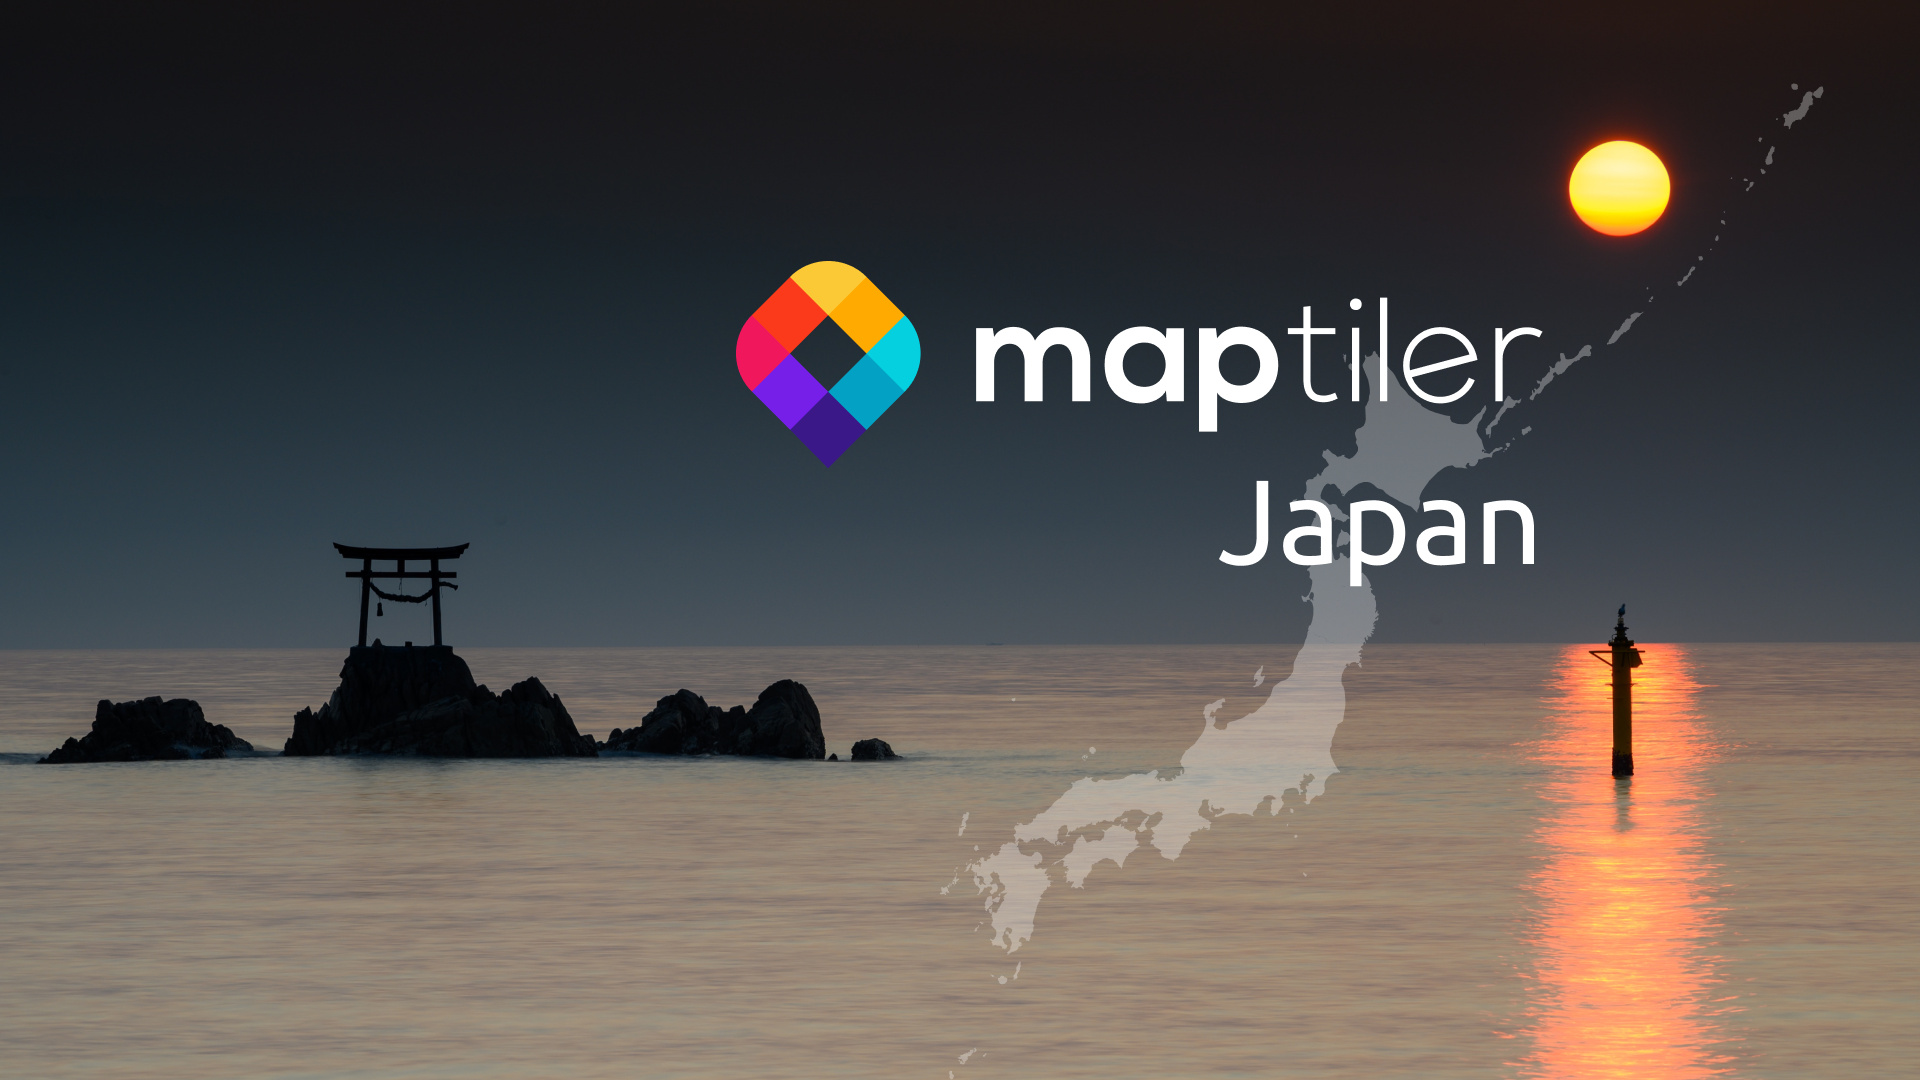 We are starting operations in Japan image